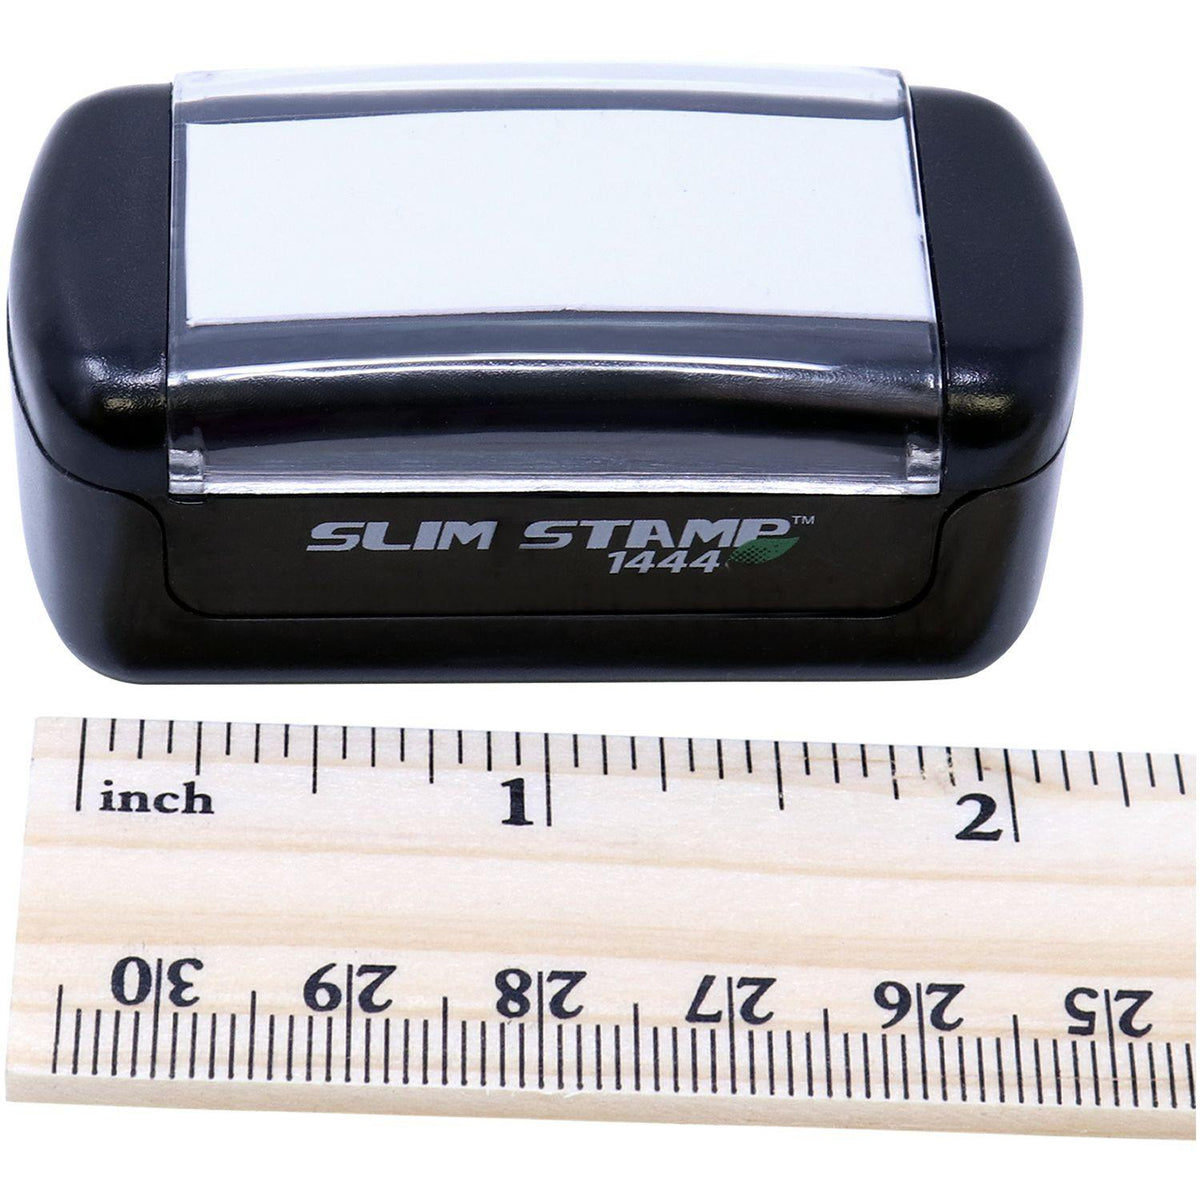 Measurement Slim Pre-Inked Contado Stamp with Ruler